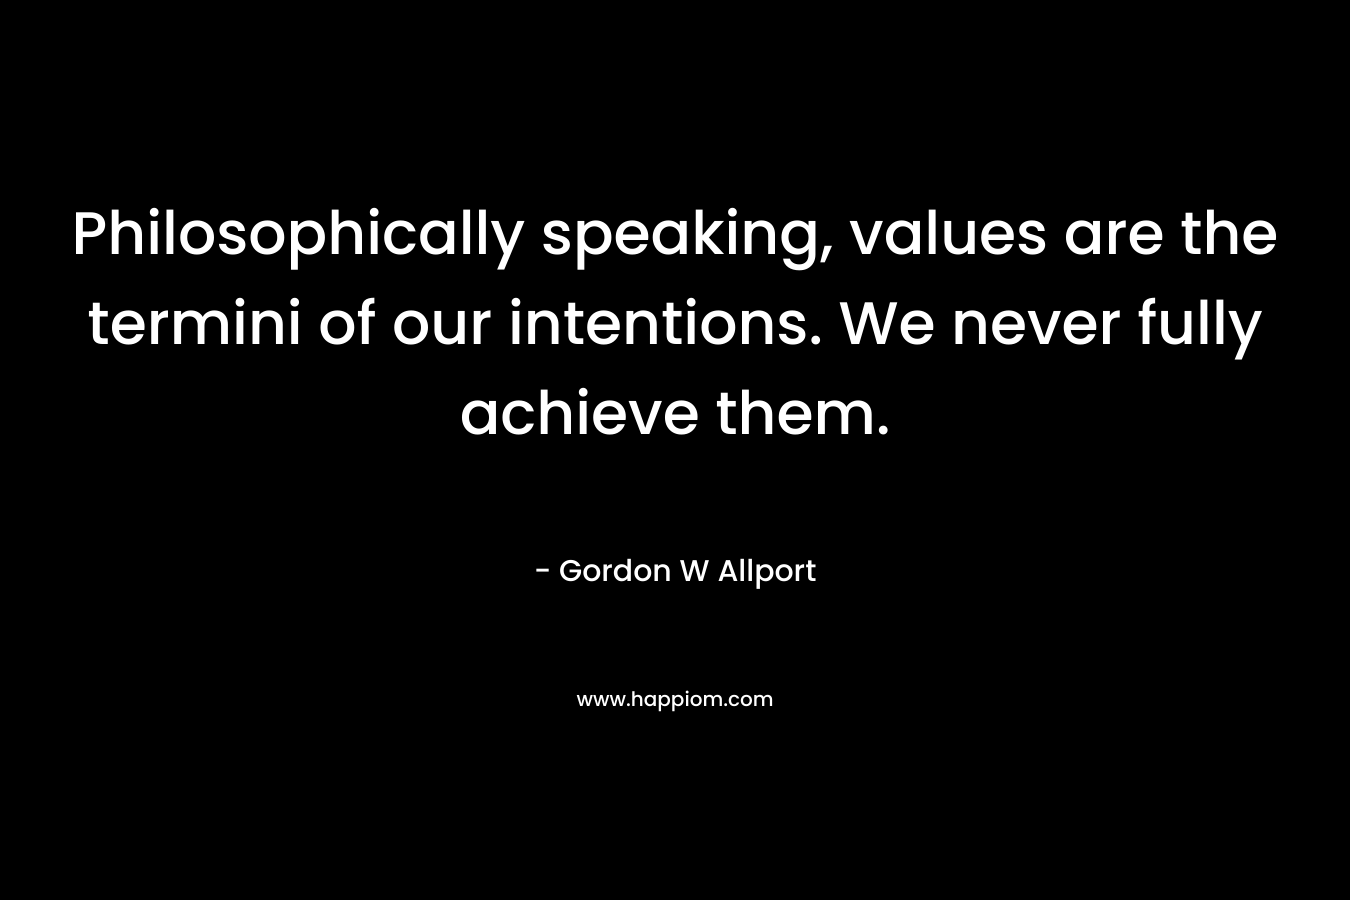 Philosophically speaking, values are the termini of our intentions. We never fully achieve them.